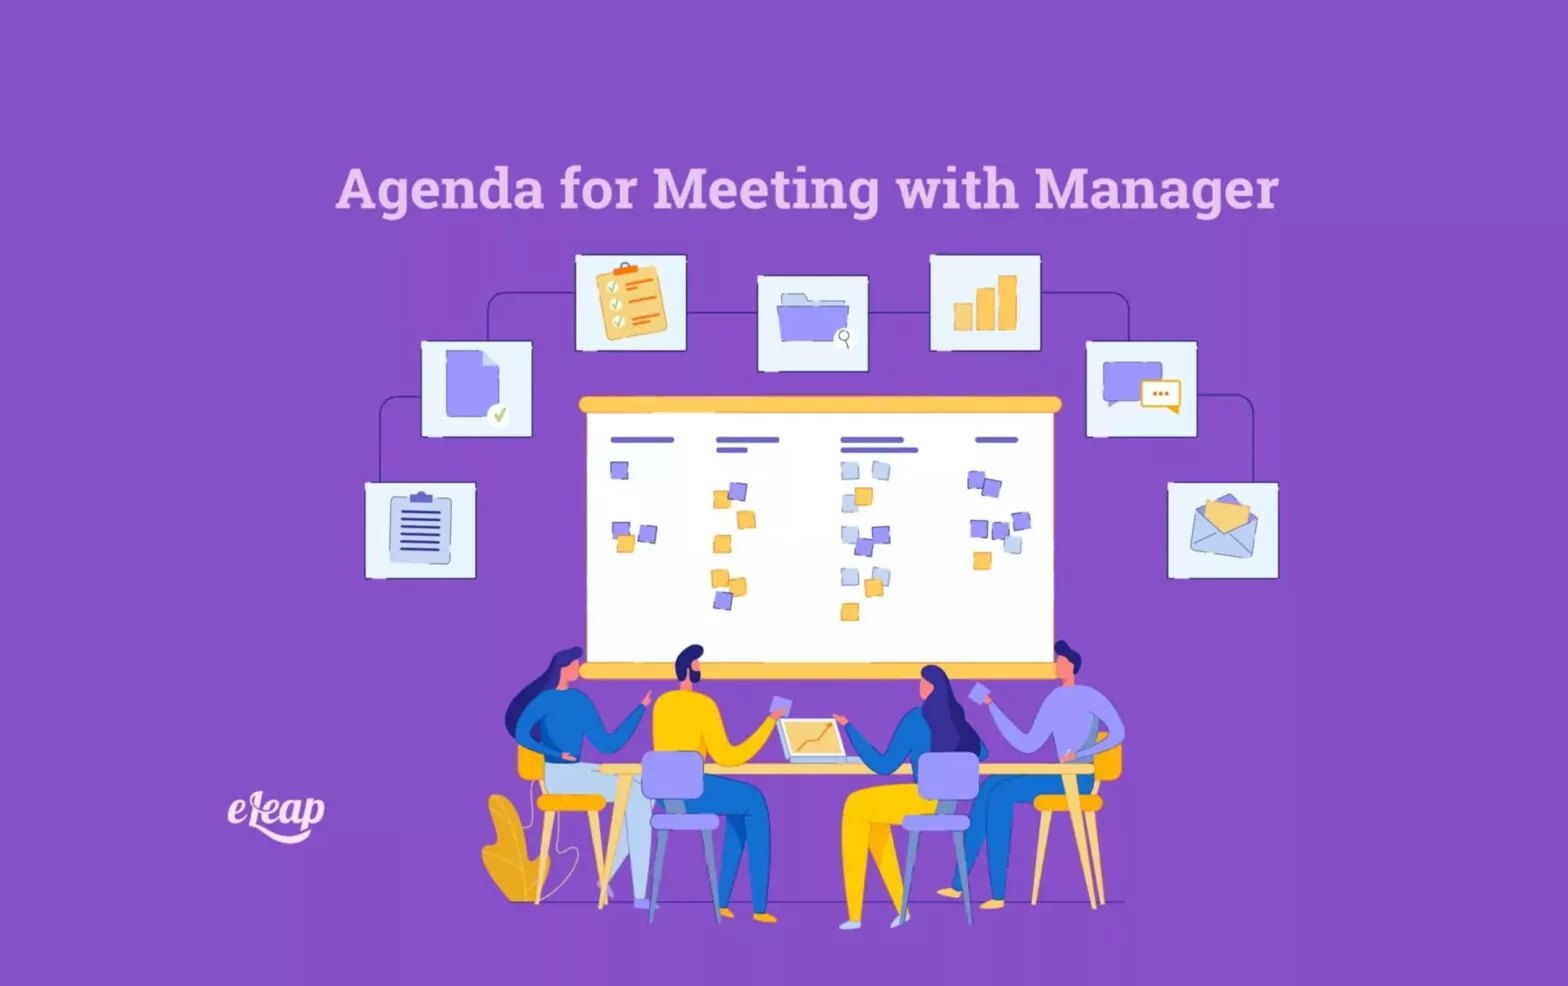 Agenda for Meeting with Manager